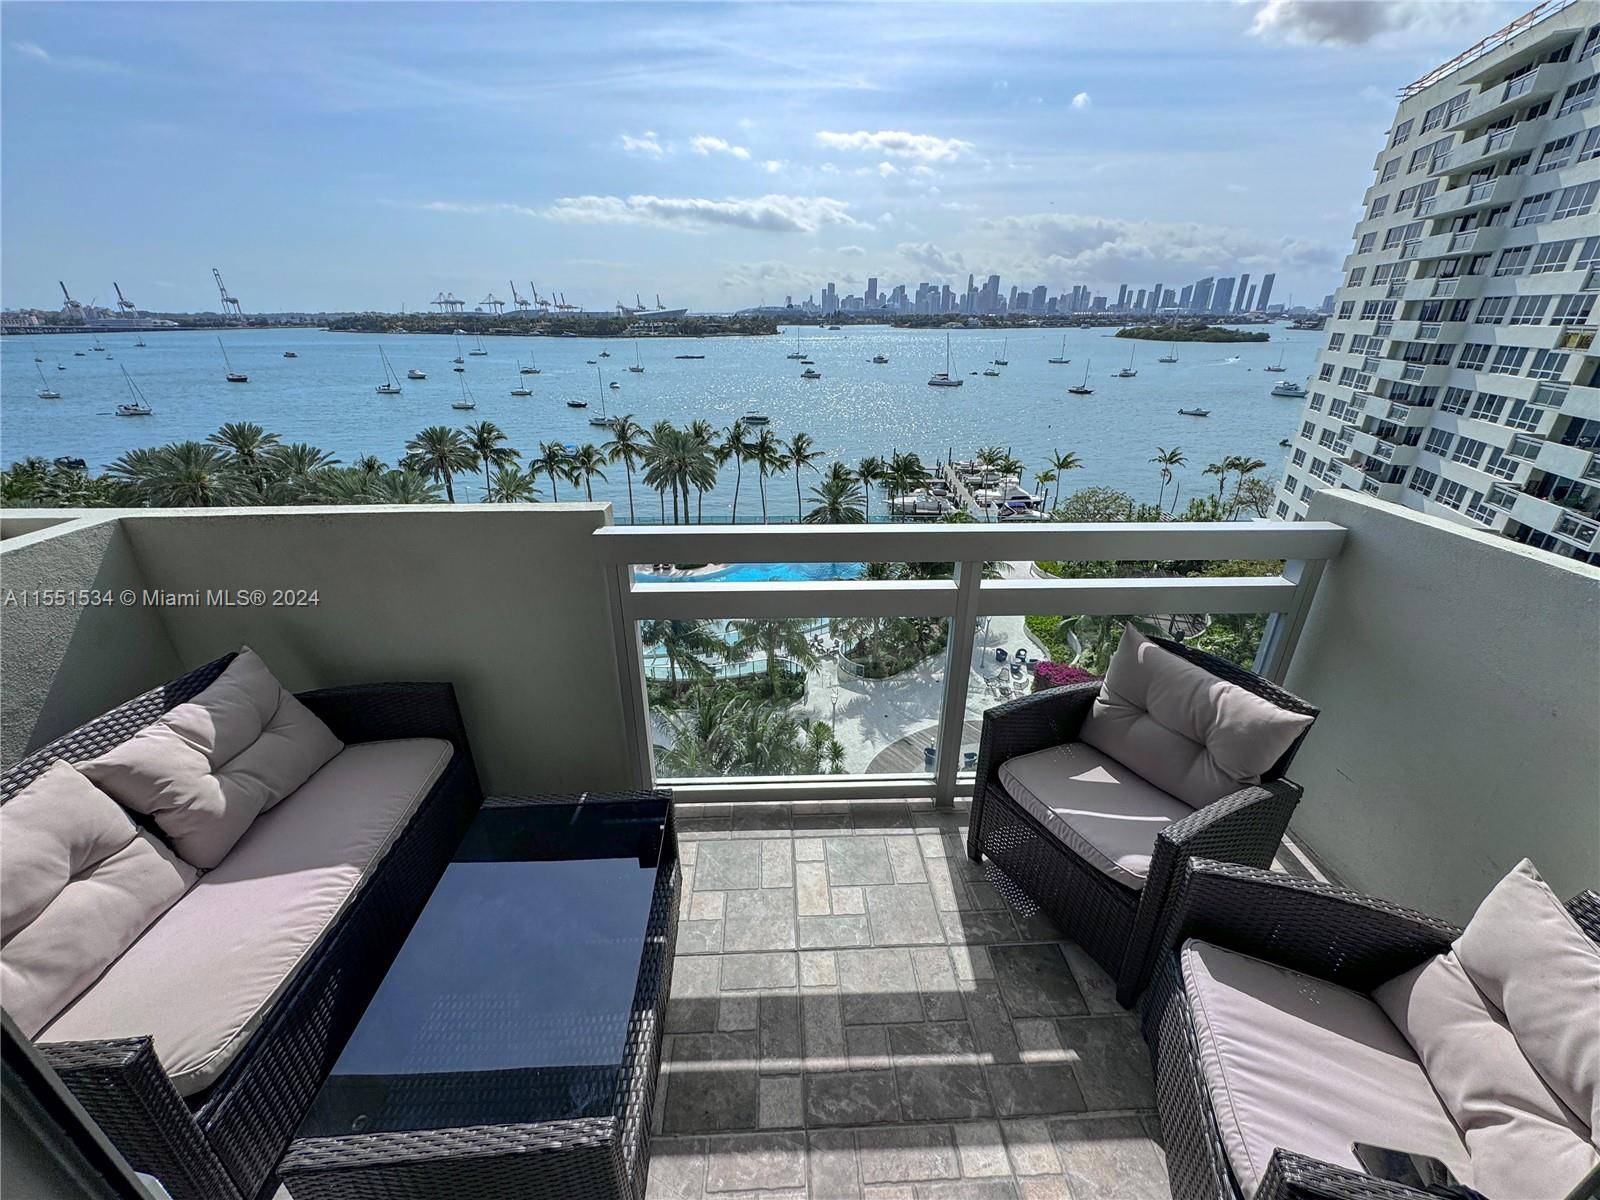 Experience luxury living in this renovated 1 bedroom condo Enjoy stunning bay and pool views from the comfort of your home.